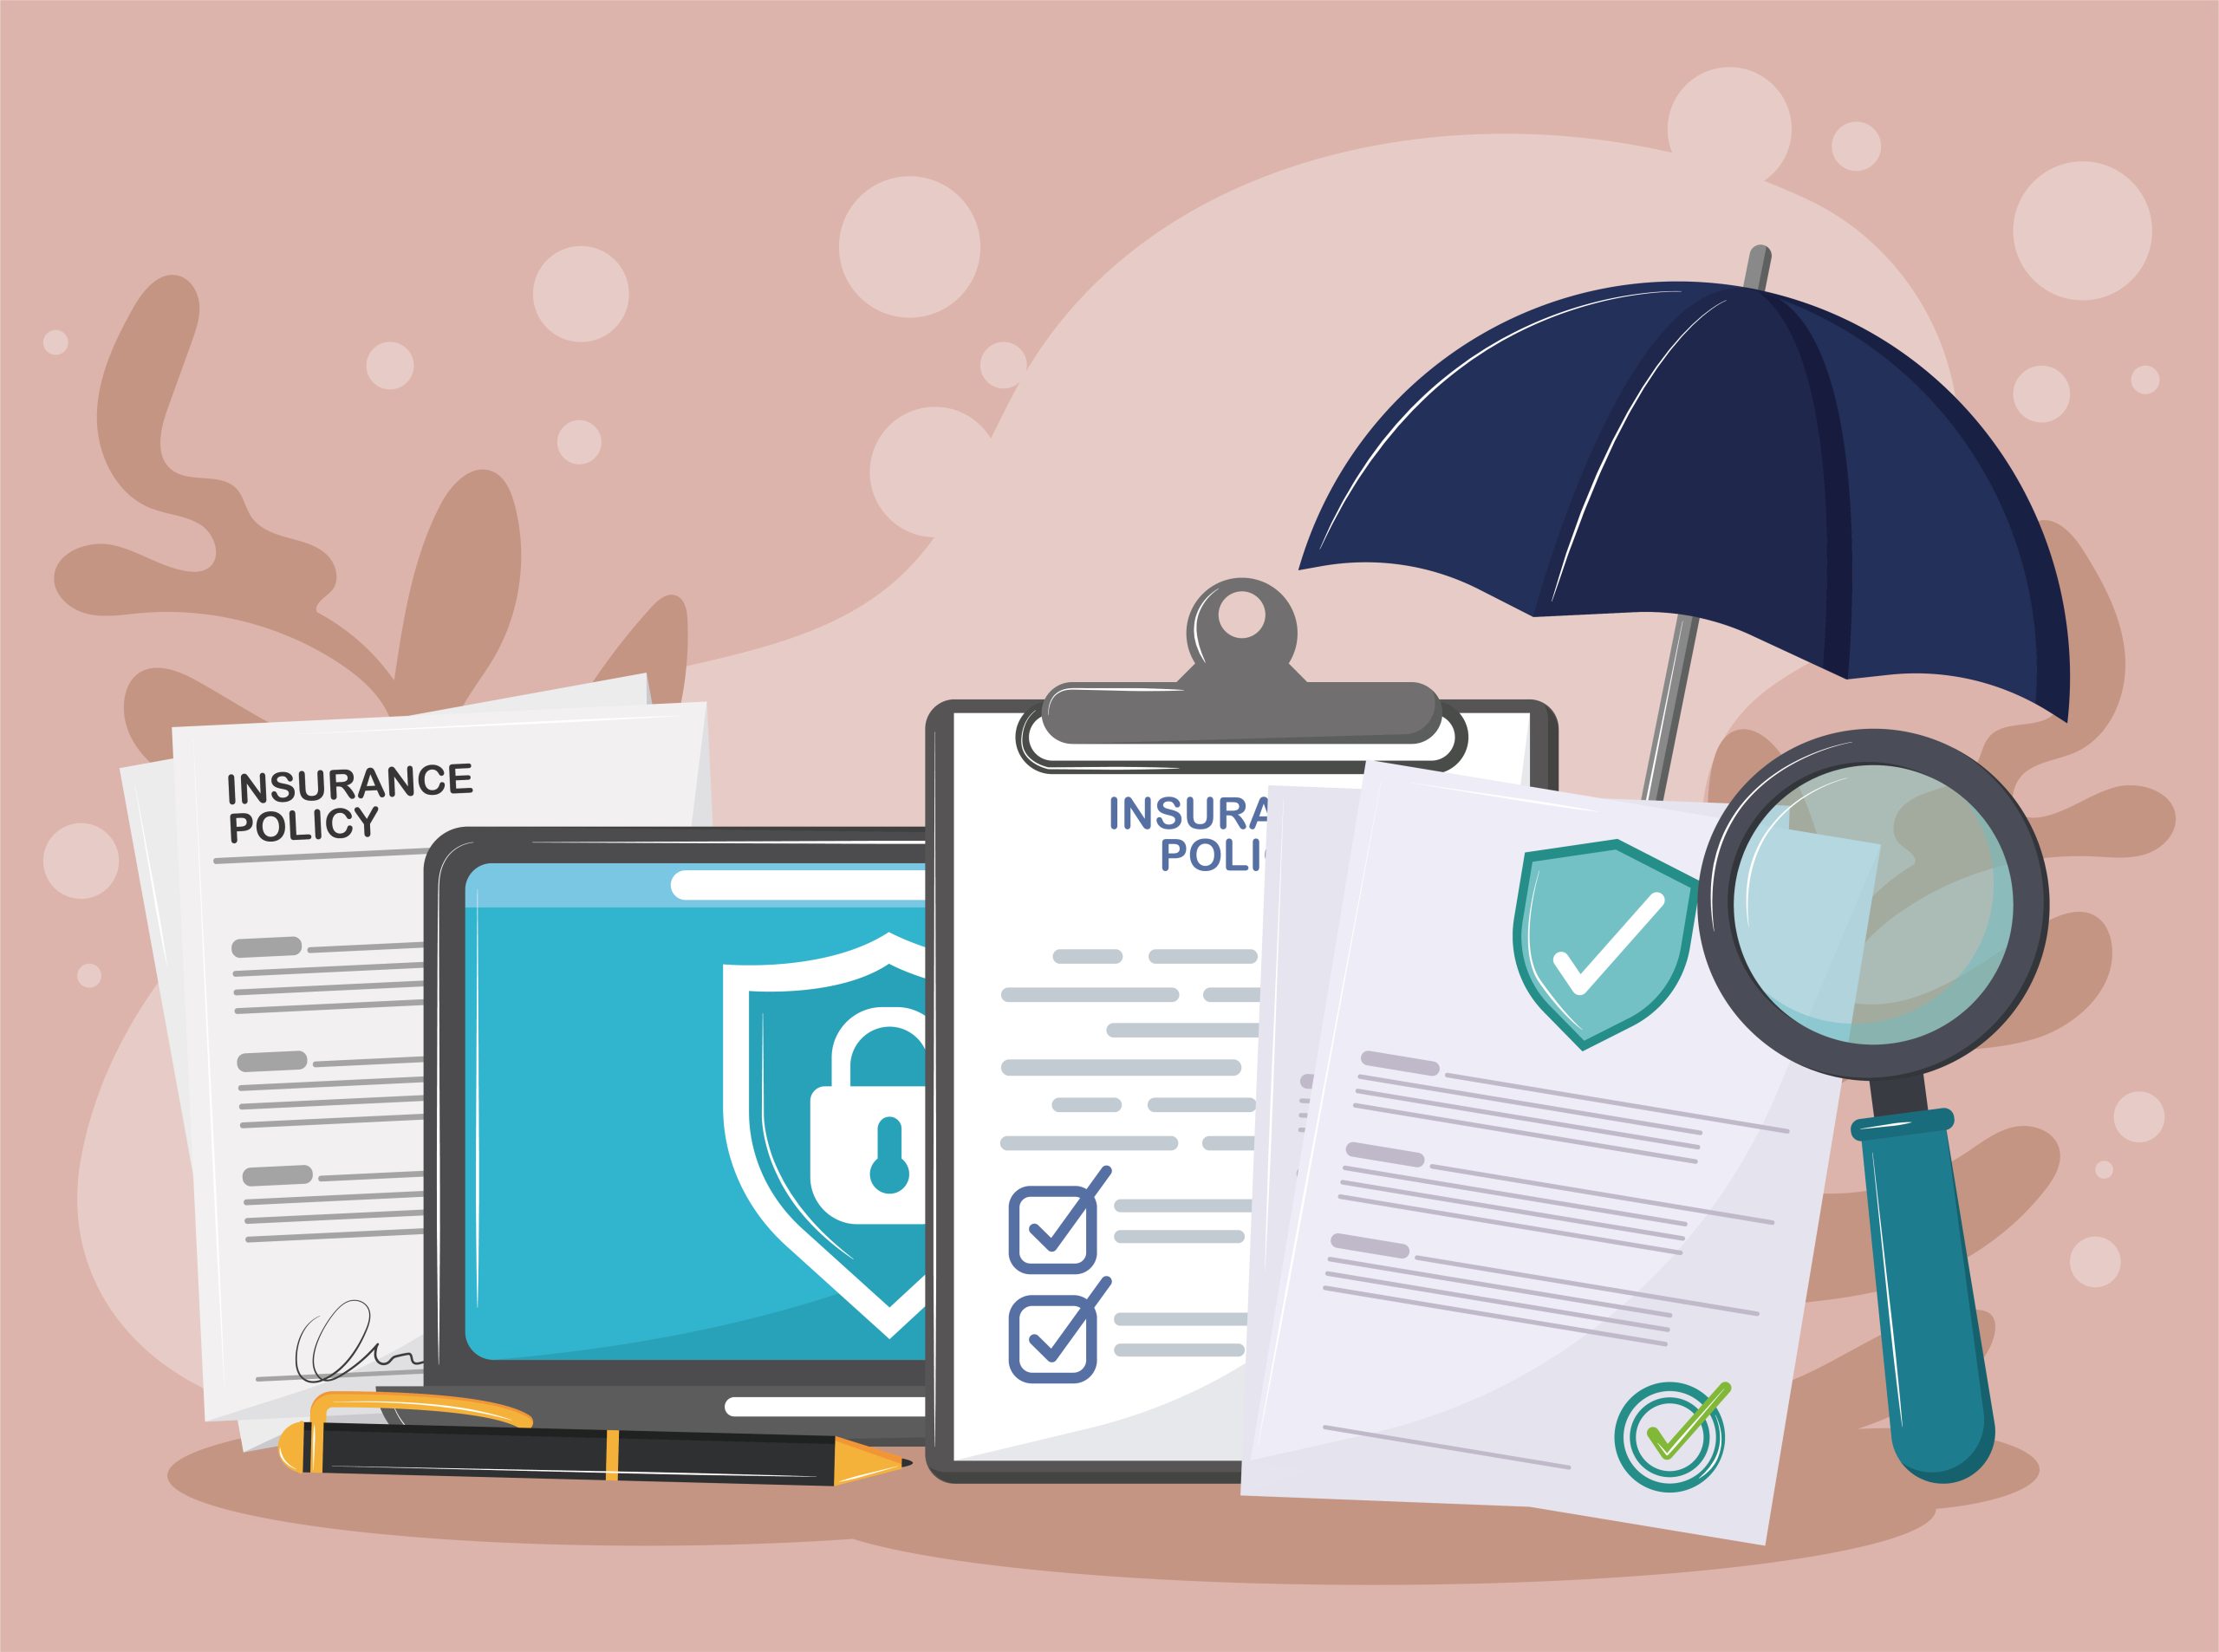 The Best Term Insurance Plan for 1 Crore: Is it Better To Buy a Term Plan With High Coverage? 